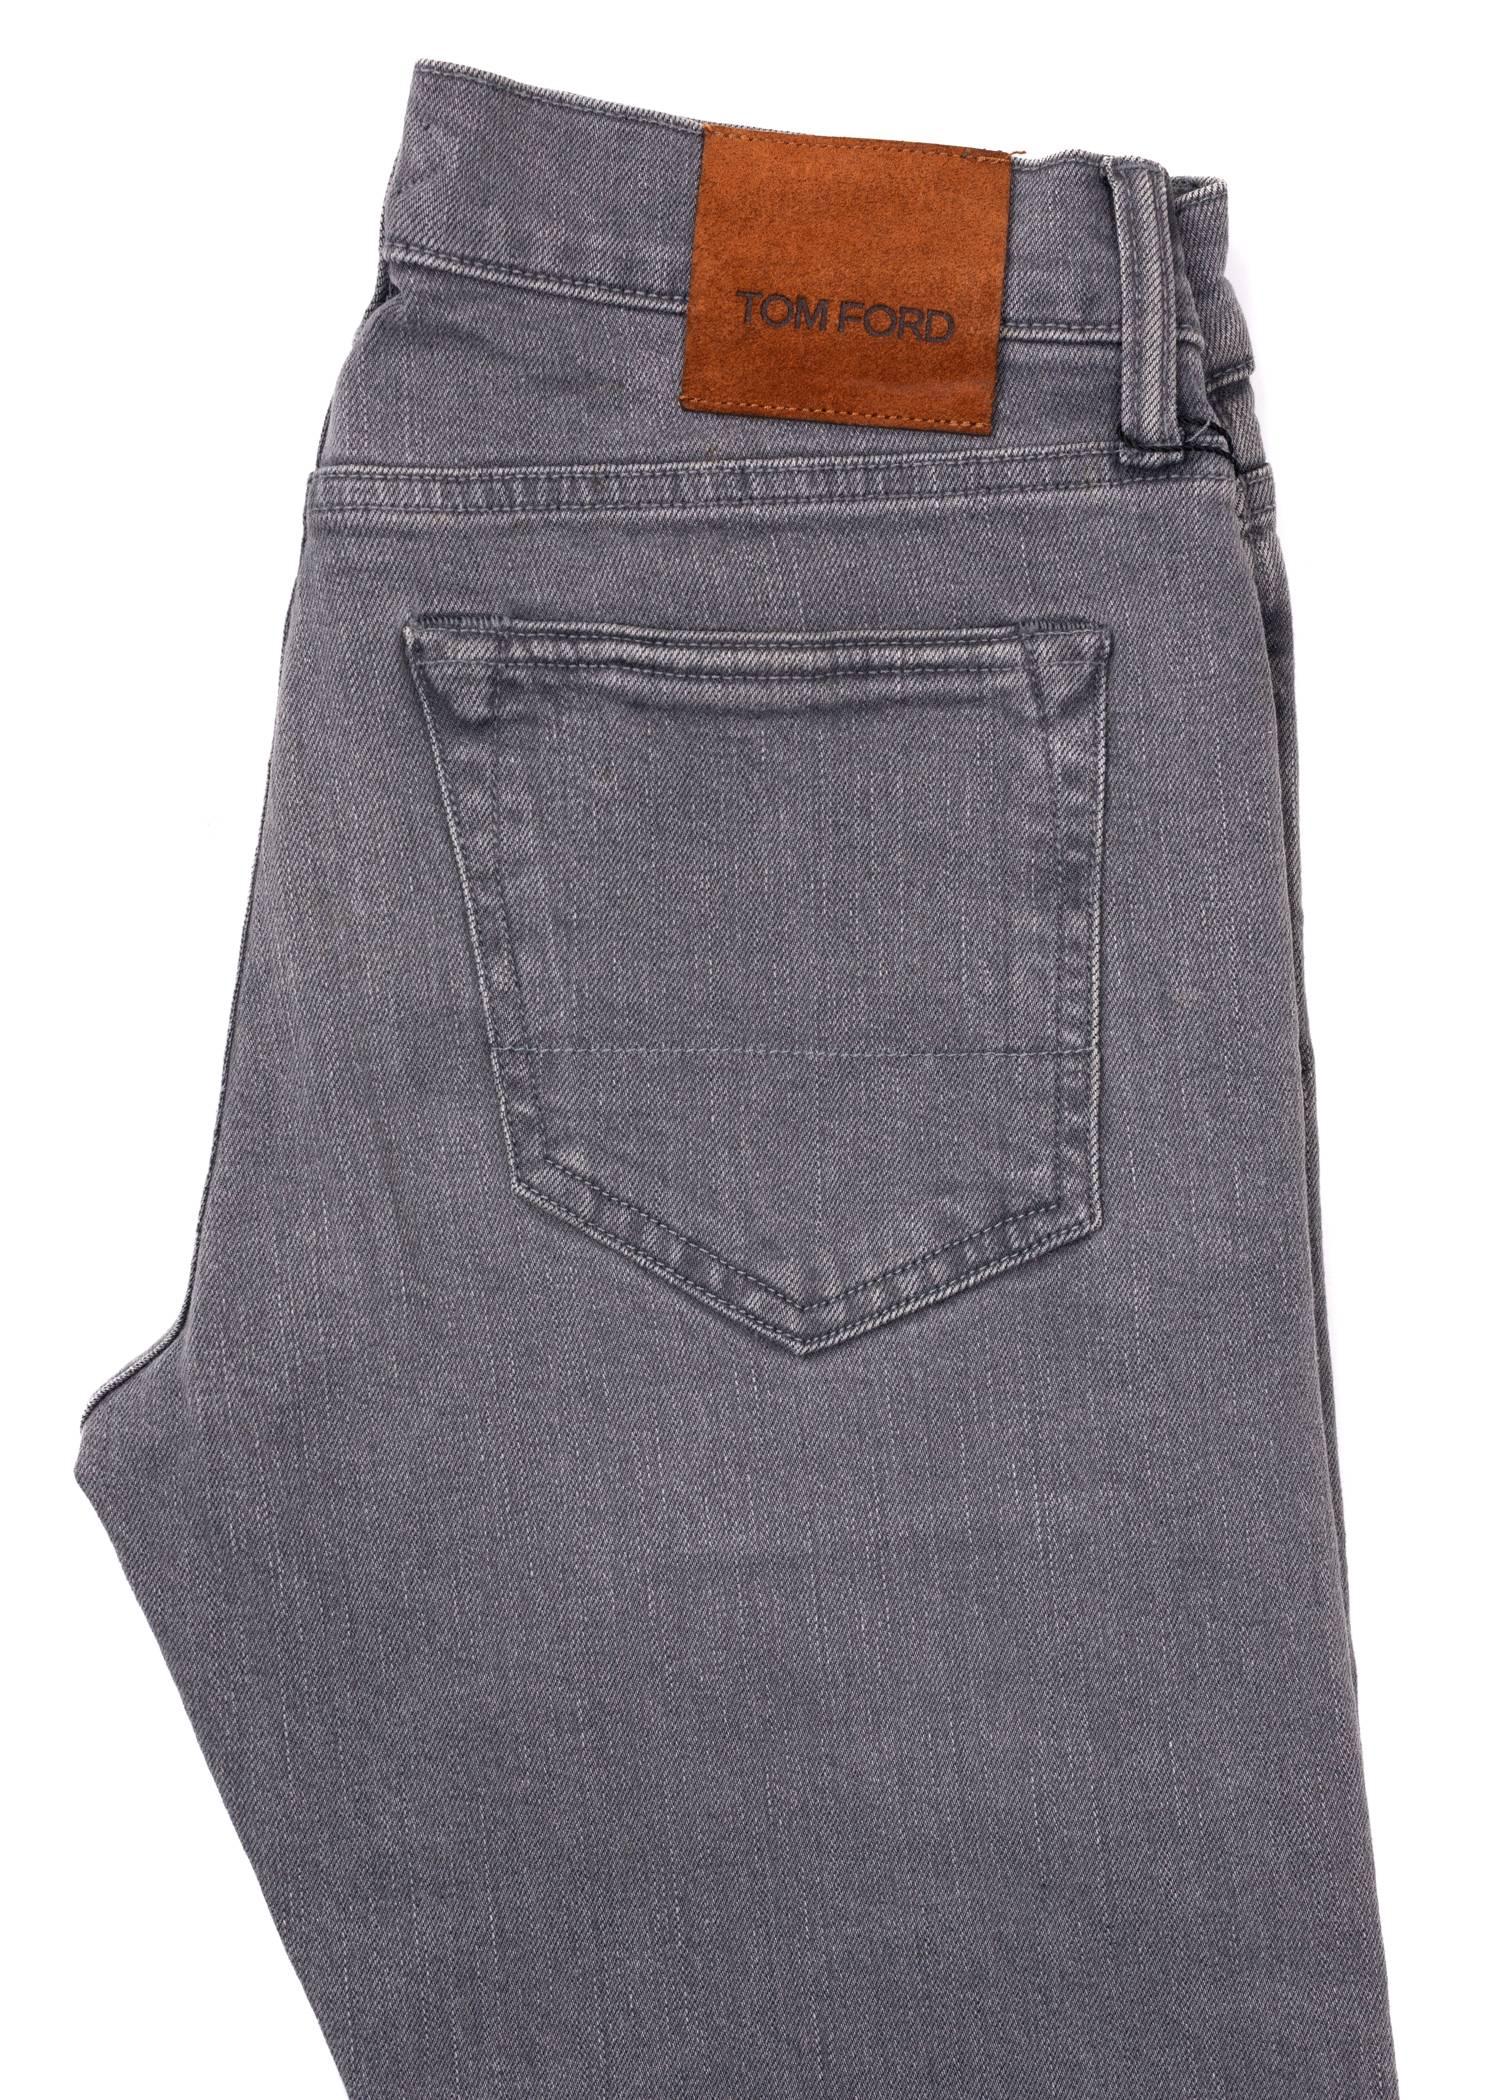 Tom Ford Selvedge Denim Jeans Light Grey Wash Size 31 Regular Fit Model In New Condition For Sale In Brooklyn, NY